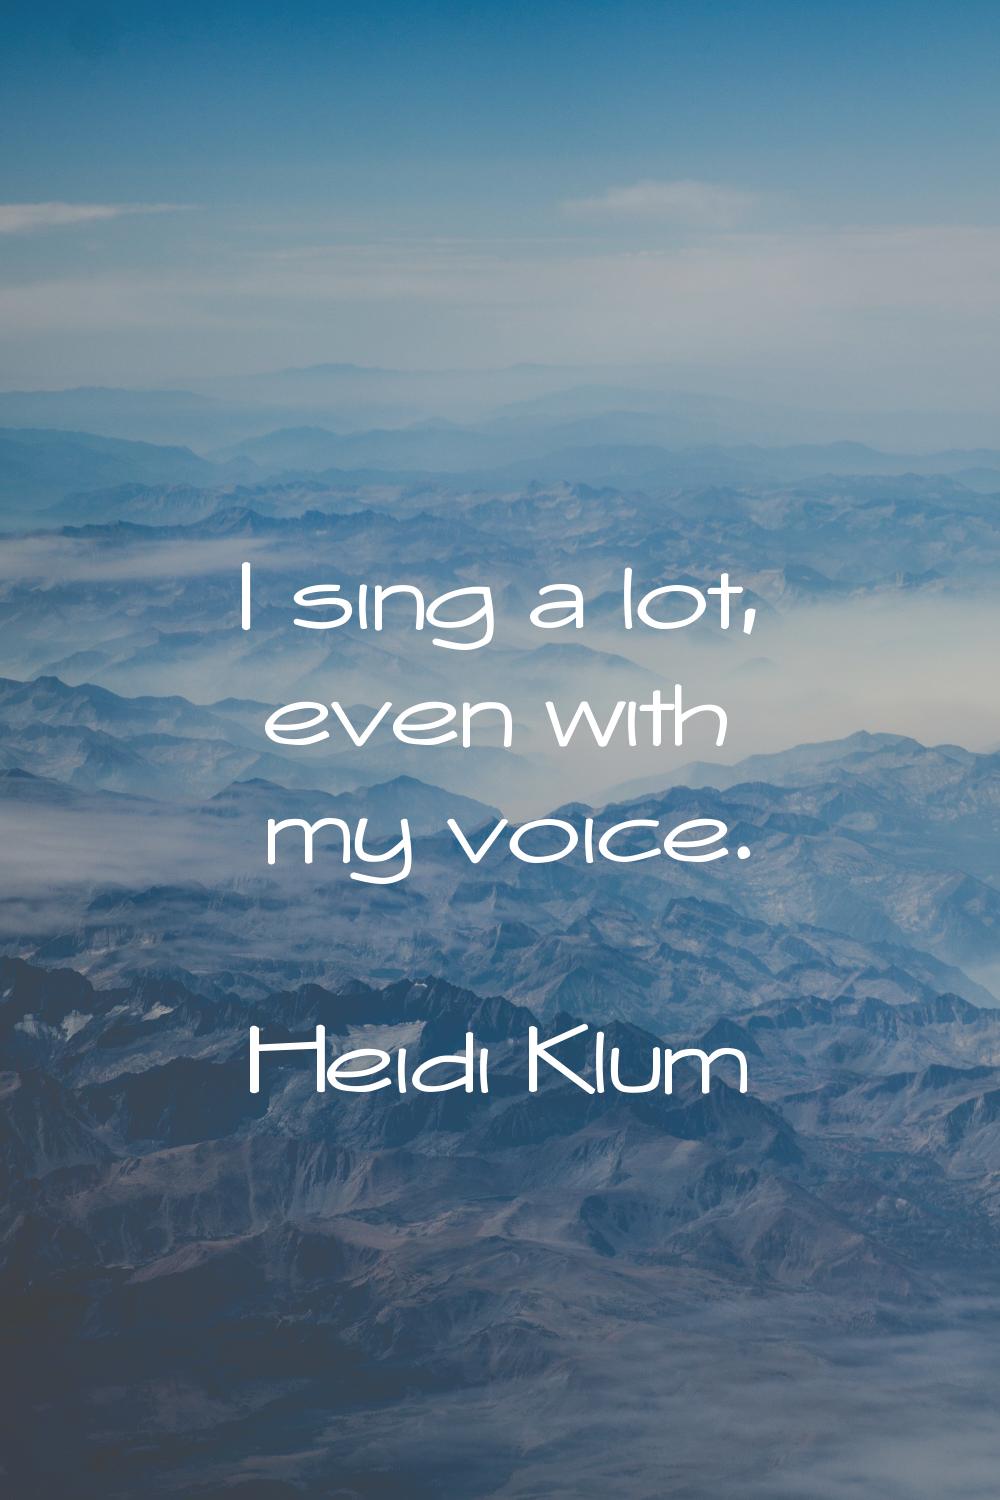 I sing a lot, even with my voice.